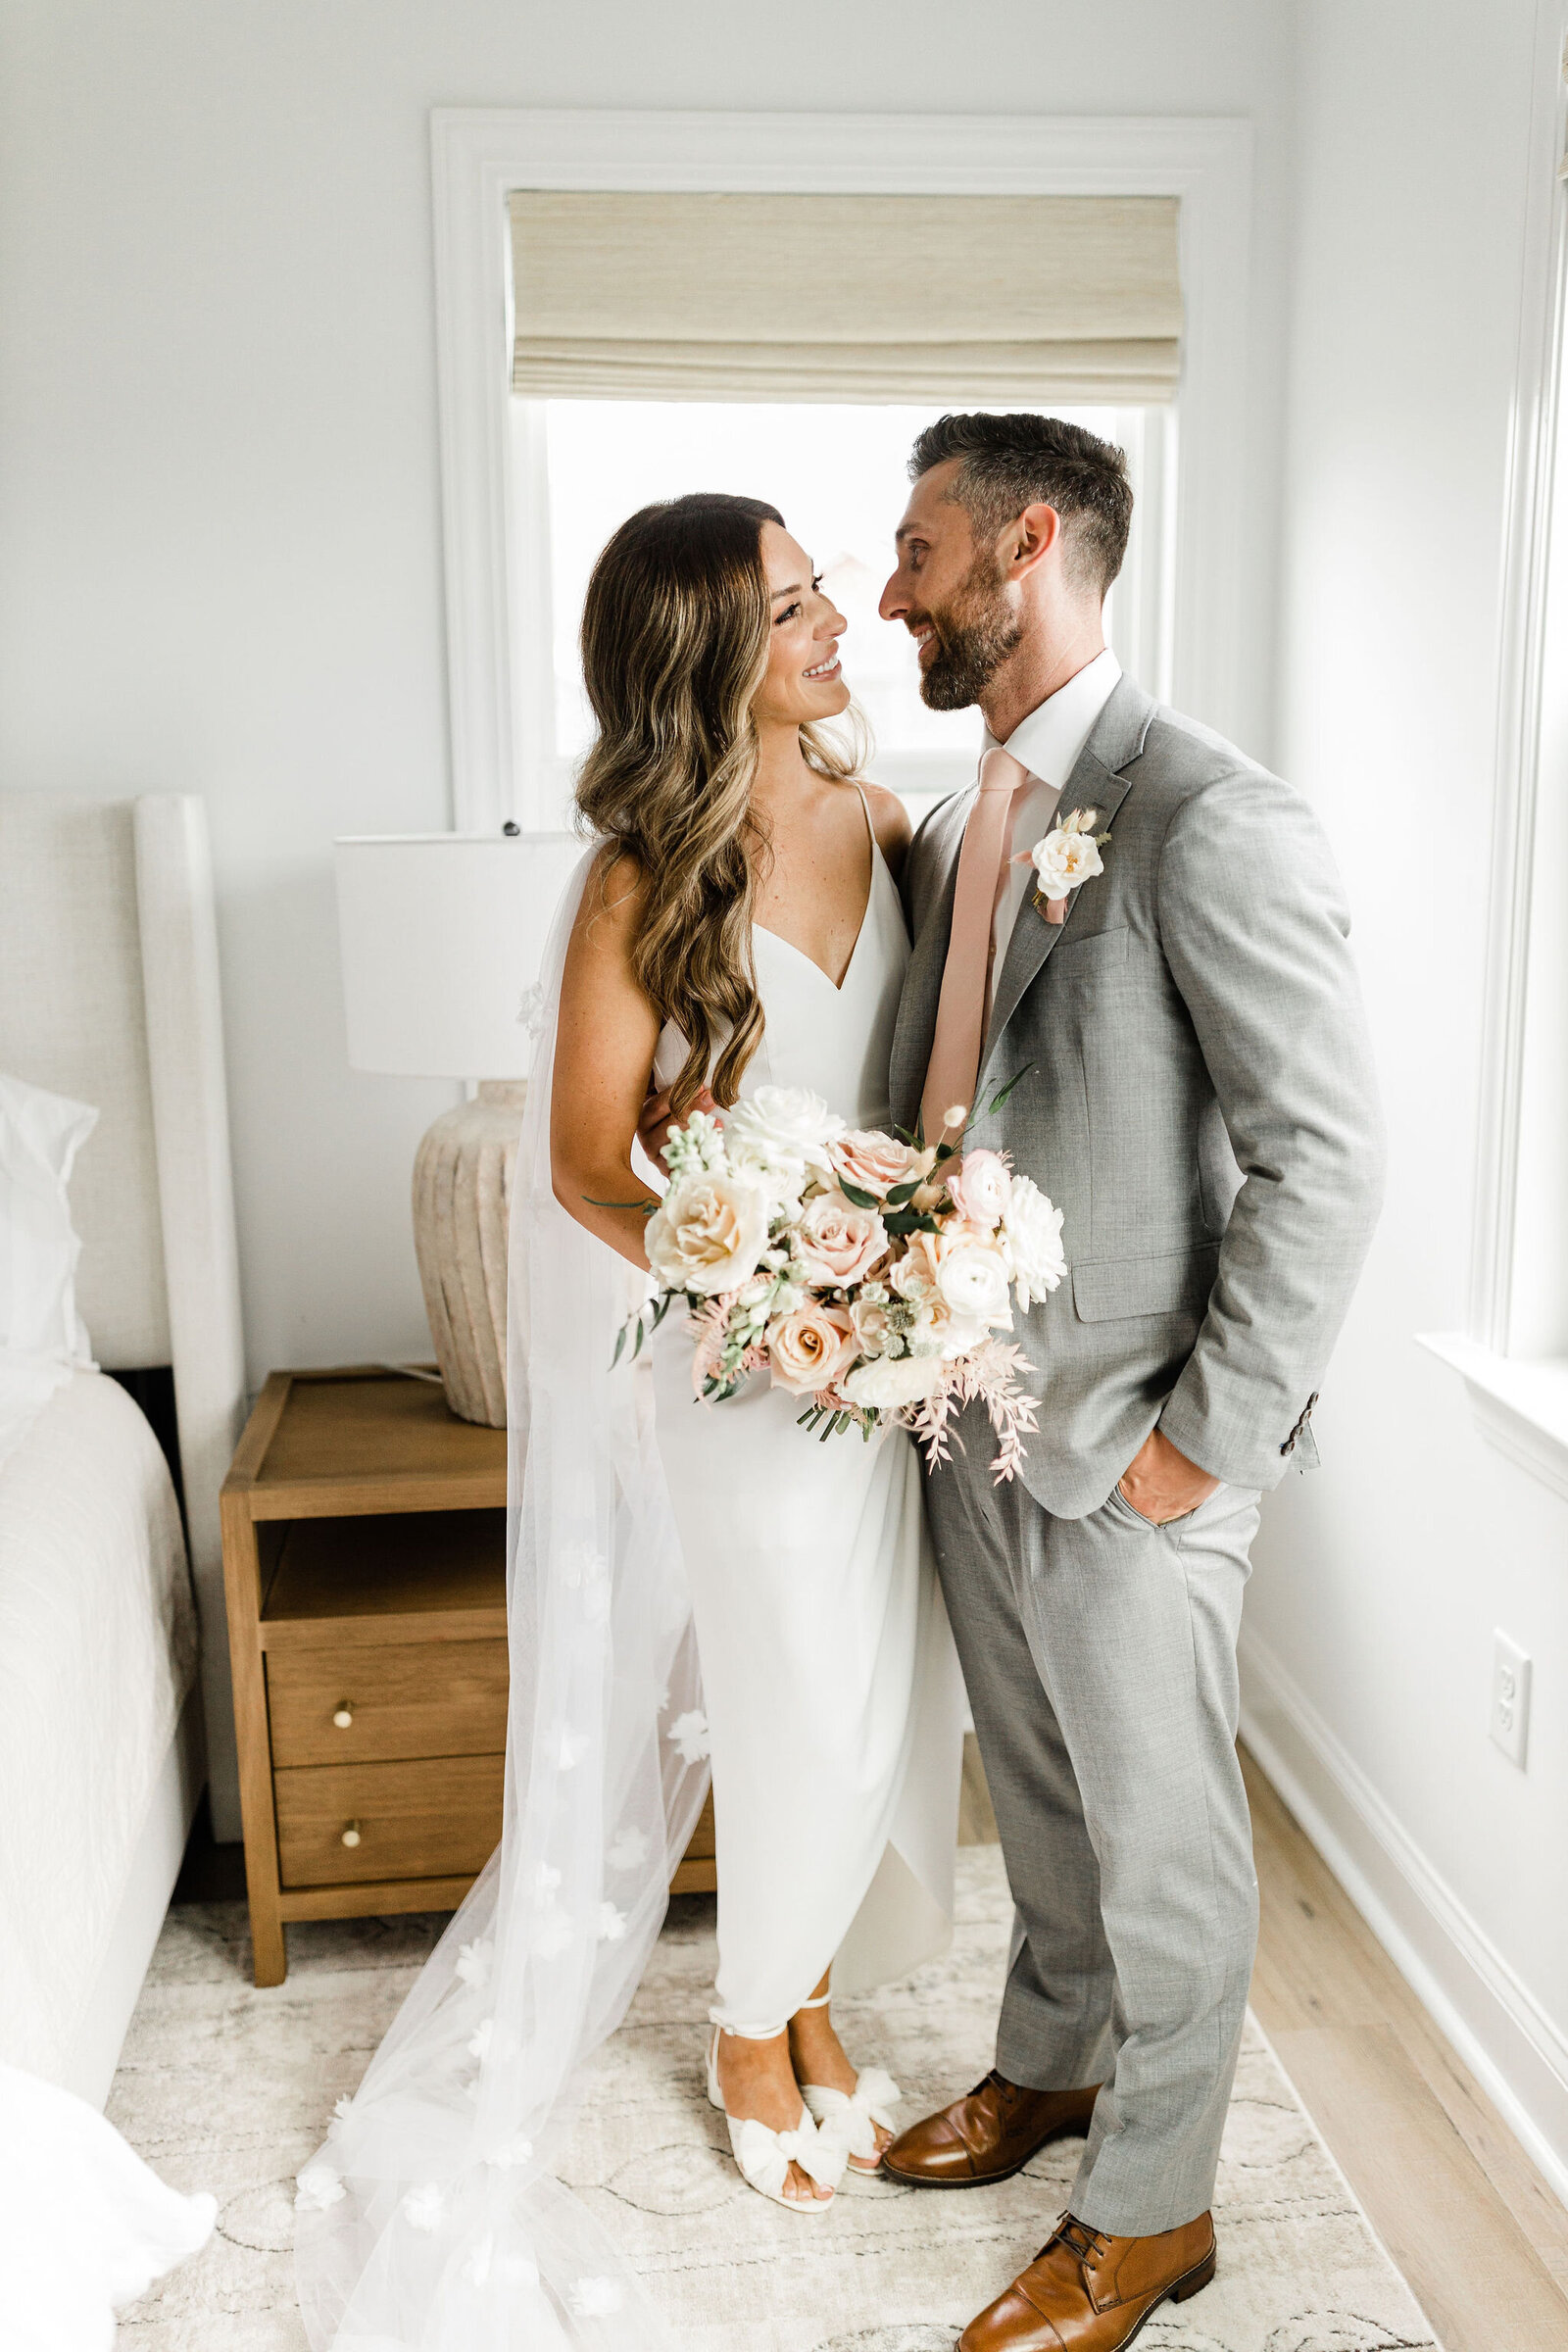 Formal Wedding Day Couples Photo | Raleigh NC | The Axtells Photo and Film